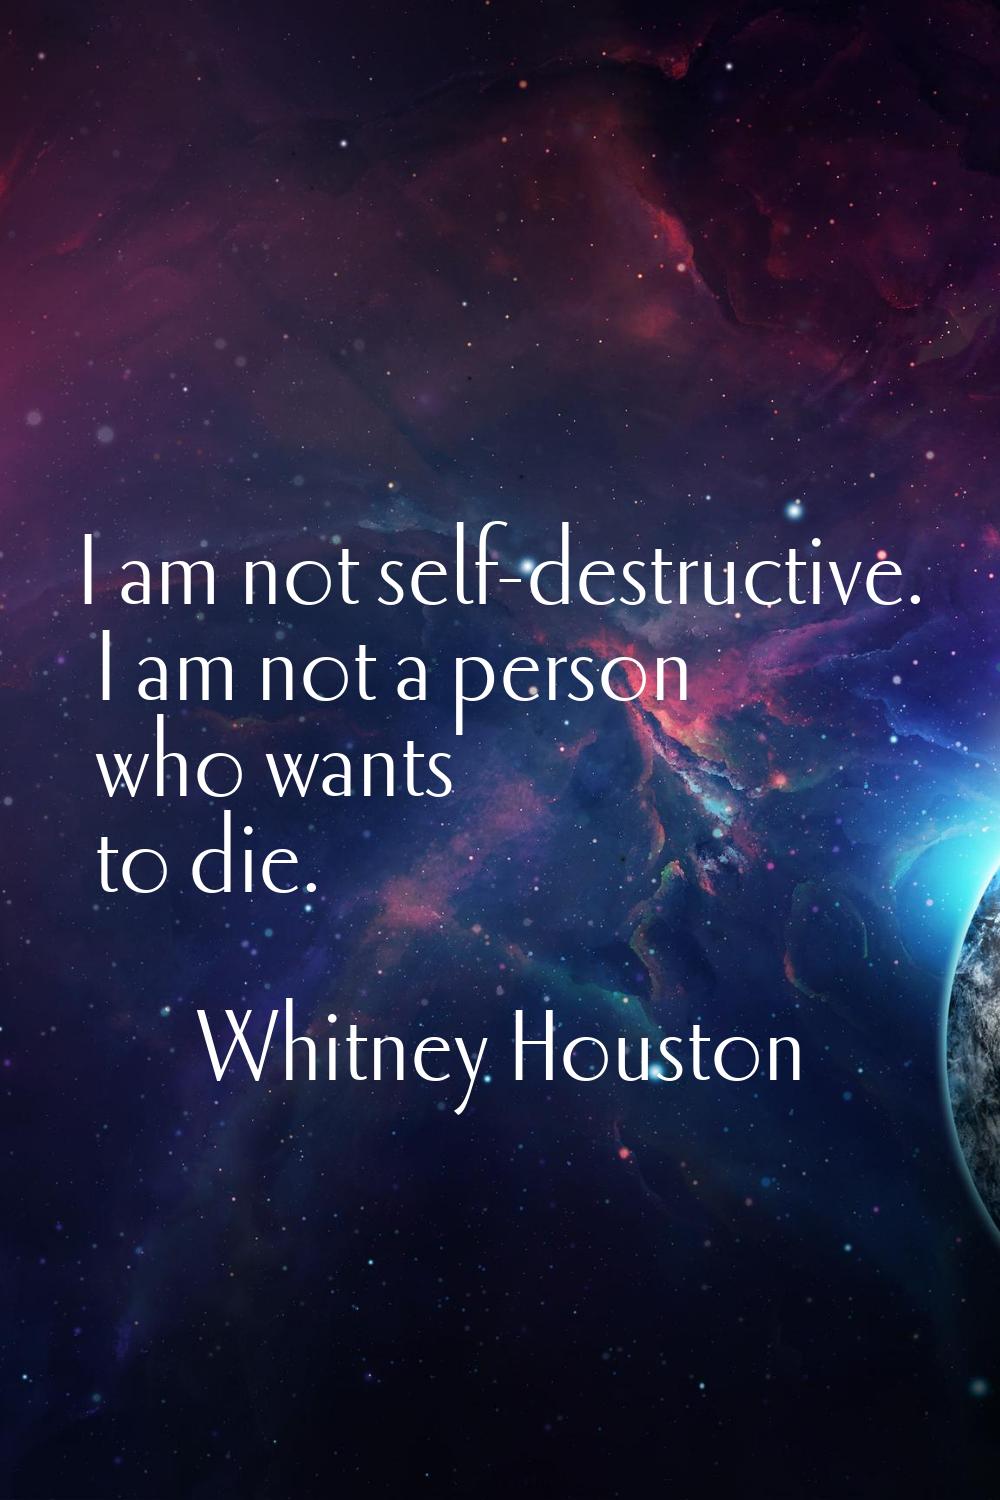 I am not self-destructive. I am not a person who wants to die.